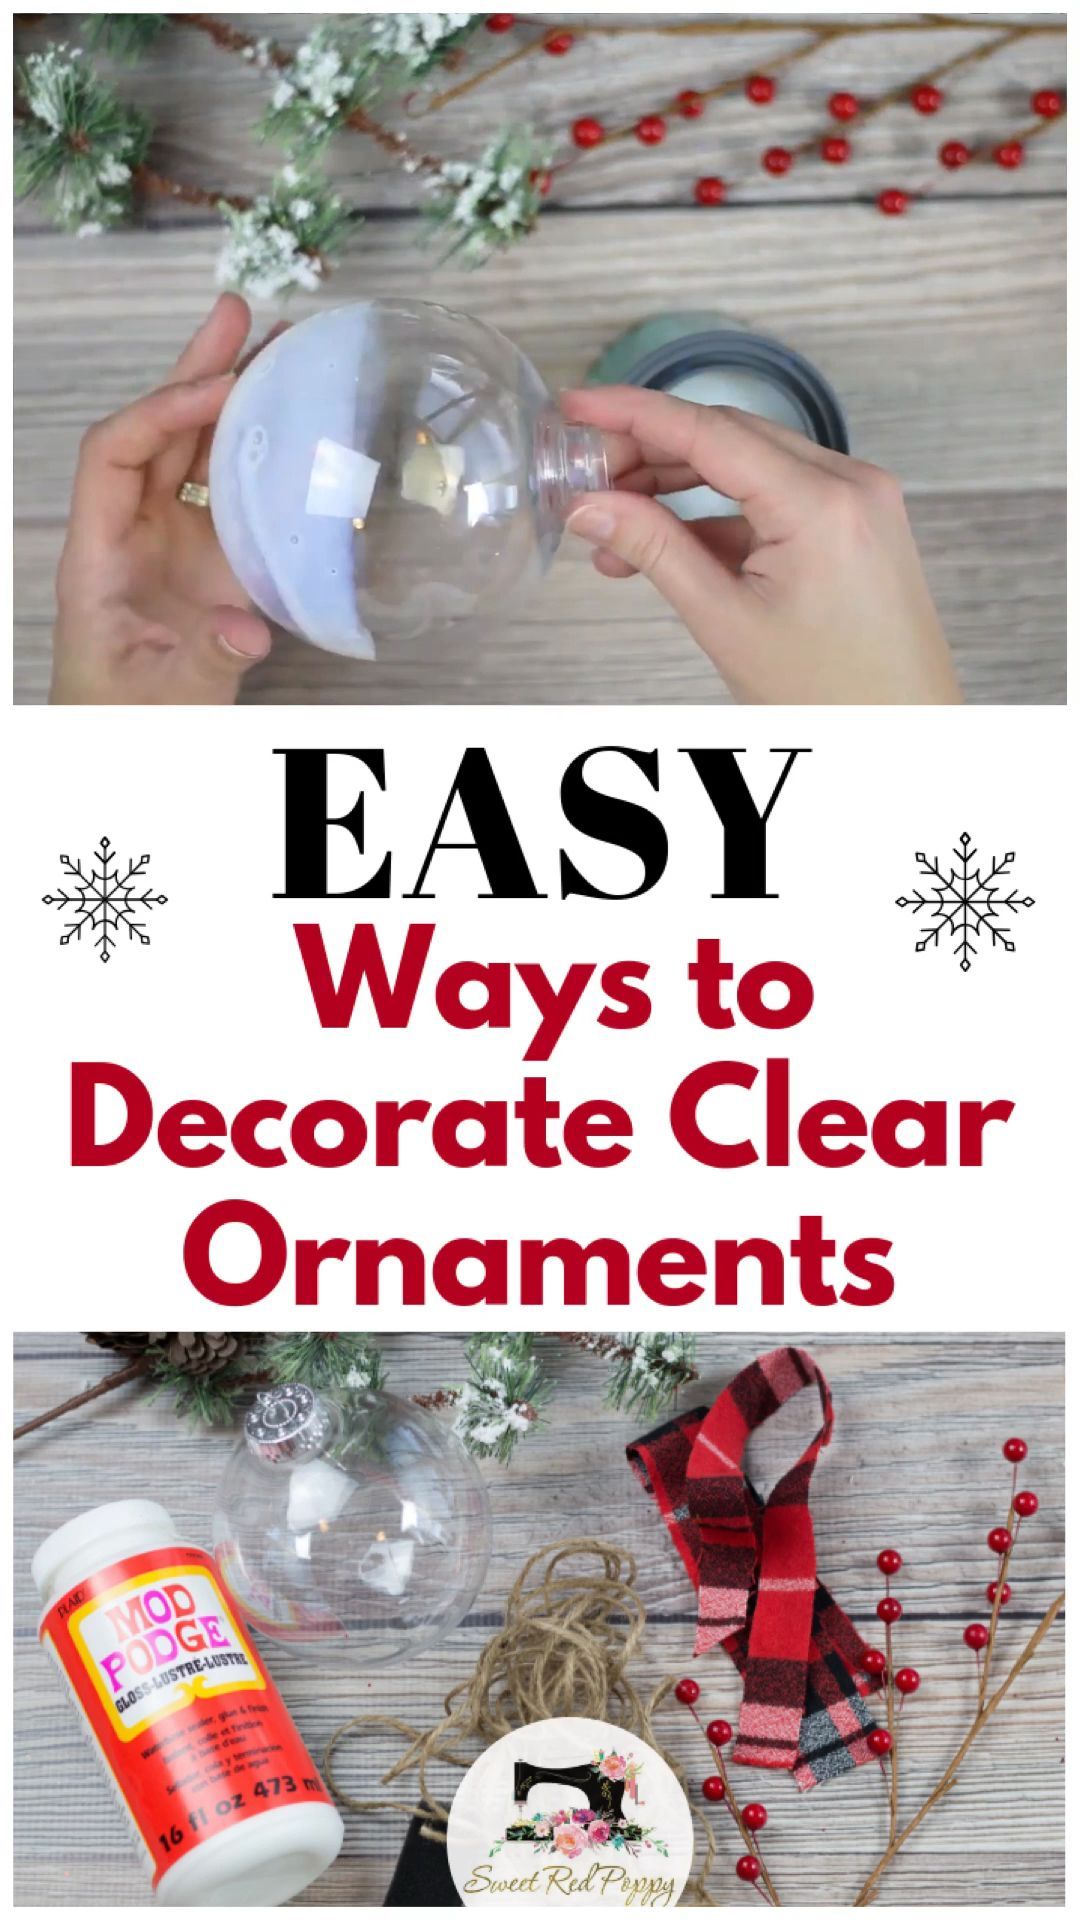 Easy Ways to Decorate Clear Plastic Ornaments for Christmas - Sweet Red Poppy - Easy Ways to Decorate Clear Plastic Ornaments for Christmas - Sweet Red Poppy -   18 diy Christmas games ideas